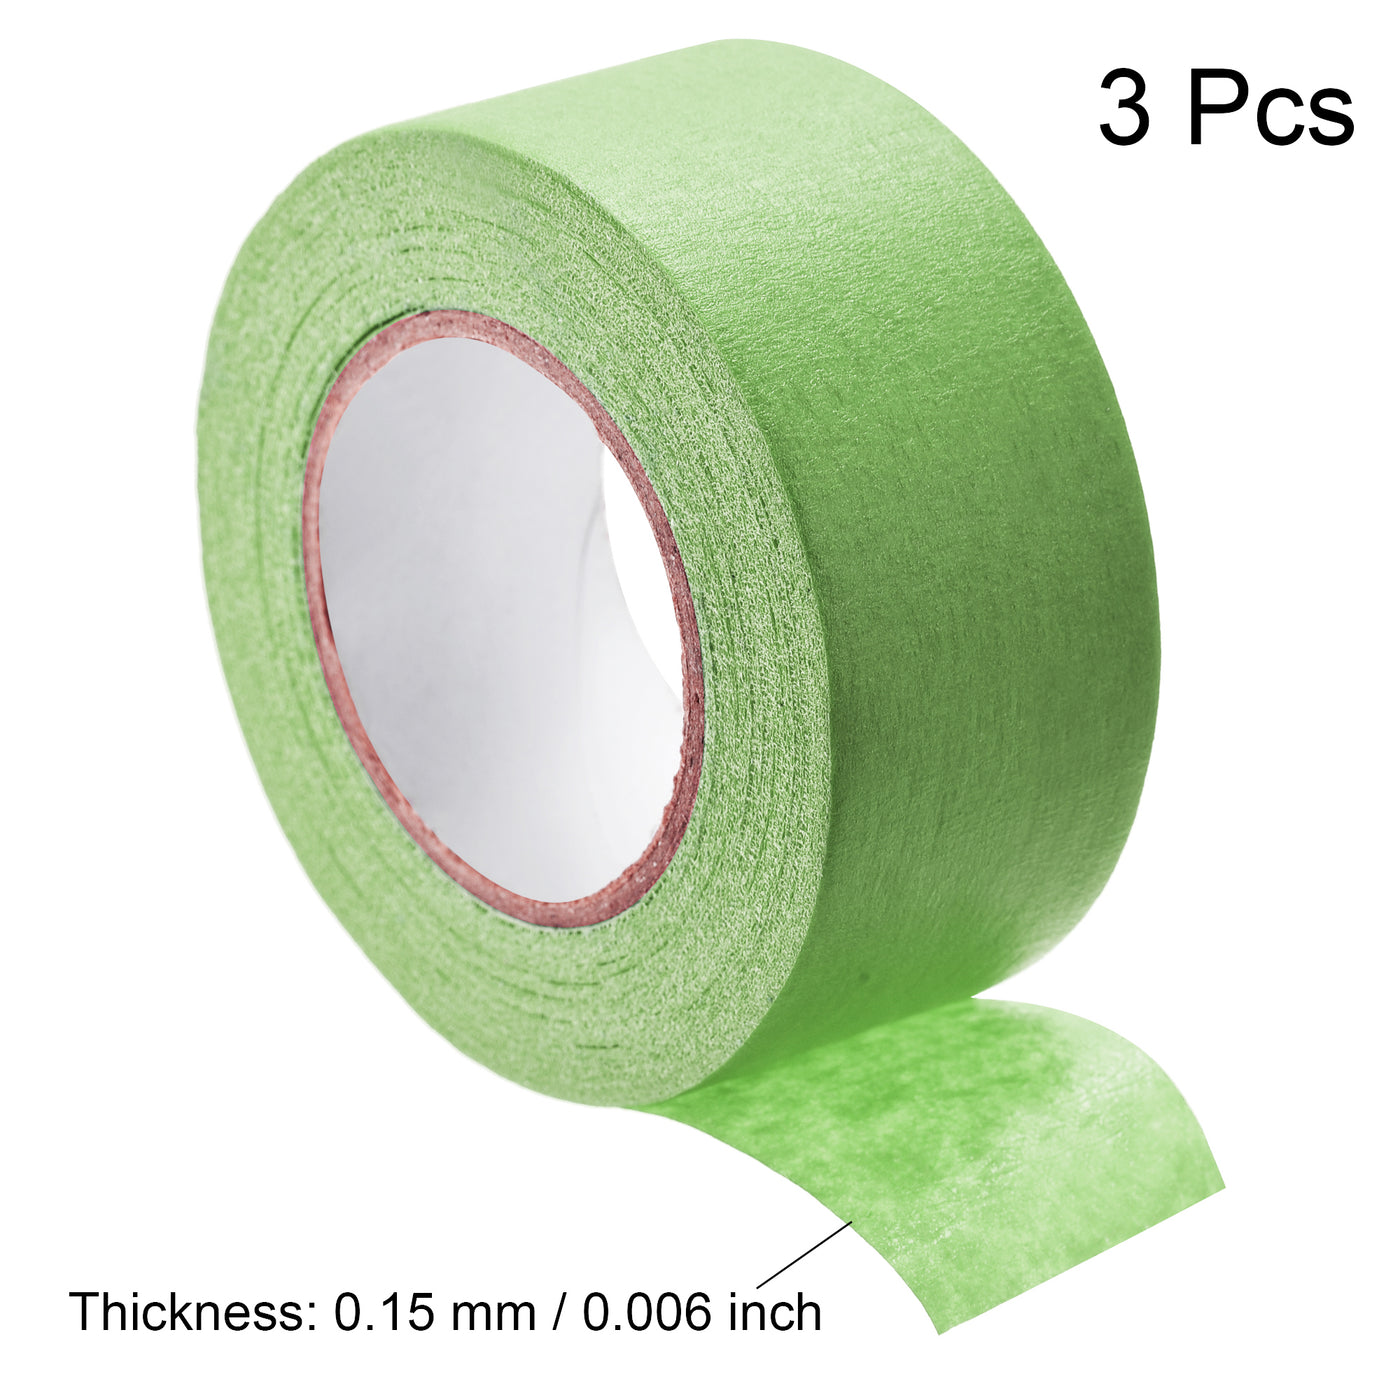 uxcell Uxcell 3Pcs 30mm 1.2 inch Wide 20m 21 Yards Masking Tape Painter Tape Rolls Light Green